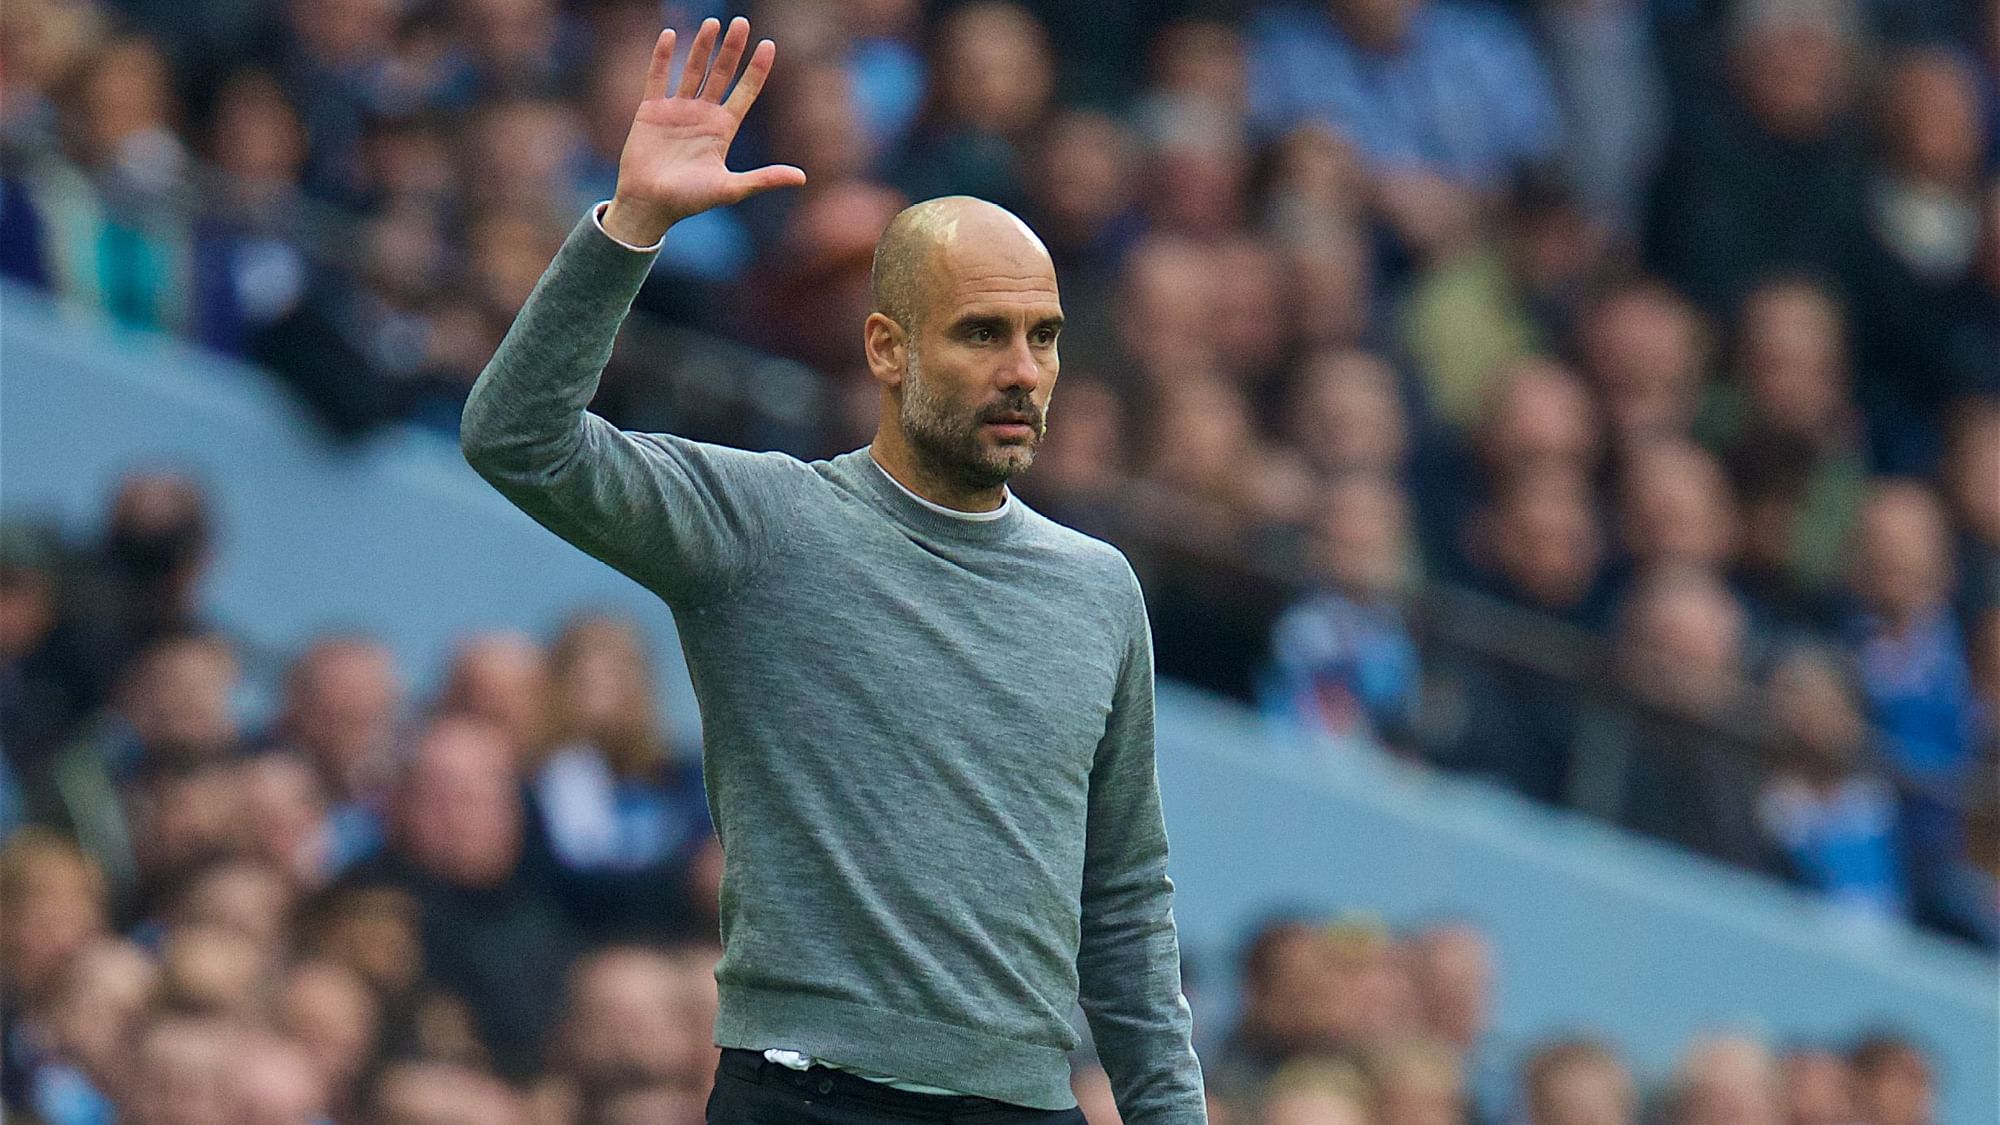 Manchester City manager Pep Guardiola said that the club should be apologised to after their two-year ban was overturned.